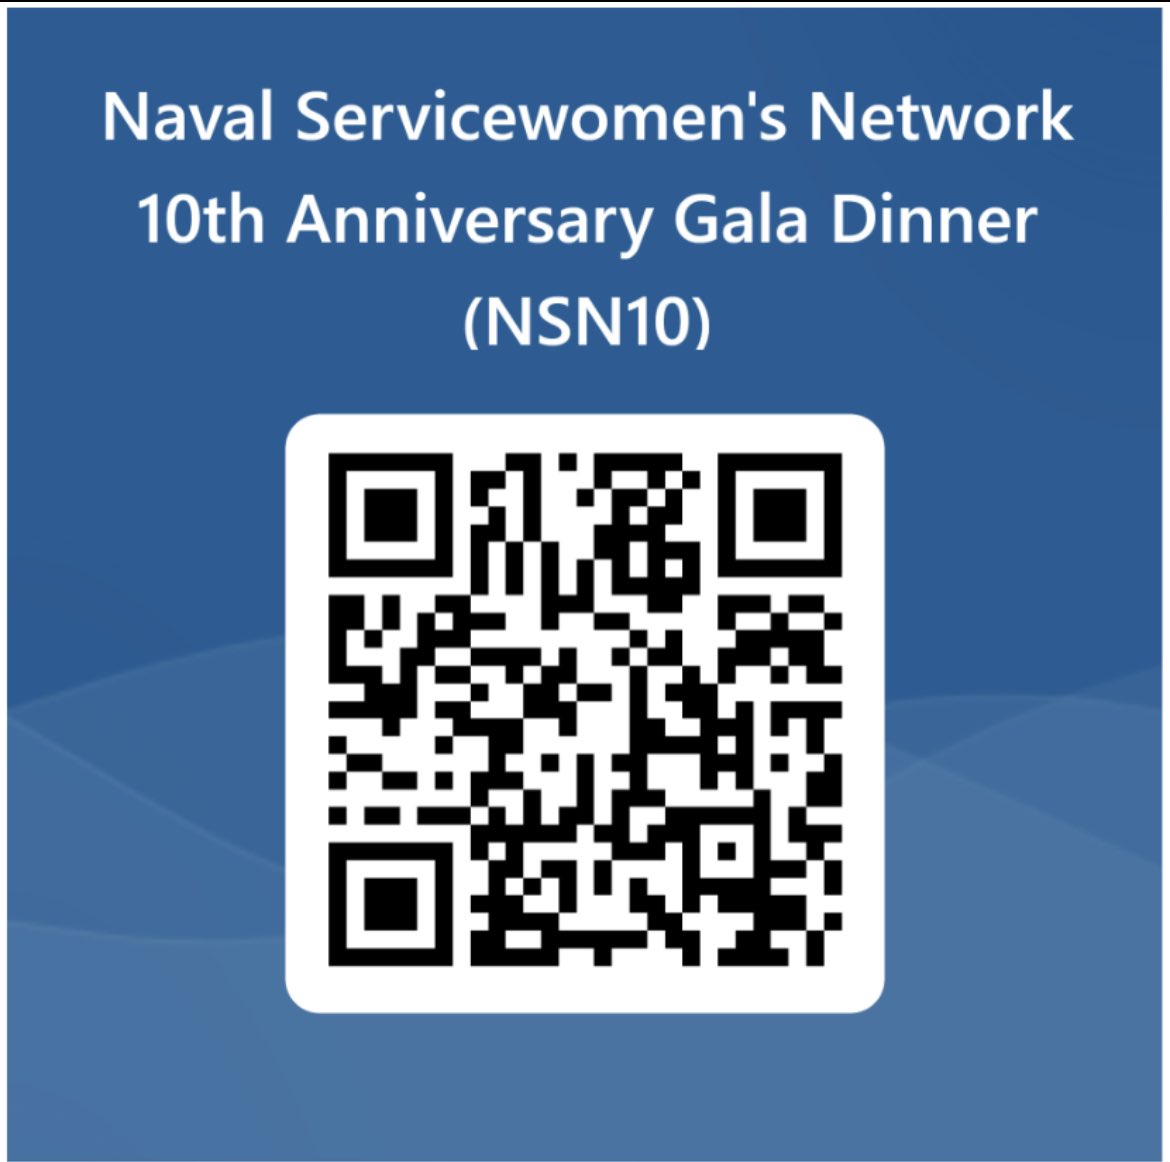 NSN10 Gala Dinner - VSC - Thu 5 Oct 23😊
RNTM will be out Monday with further admin info 👌
The 2023 Naval Servicewomen of the Year Award, sponsored by the Association of Wrens, will be presented during the dinner 🏆
Sign-up using the QR code below:
forms.office.com/e/zrMyCcVSy9
#NSN10